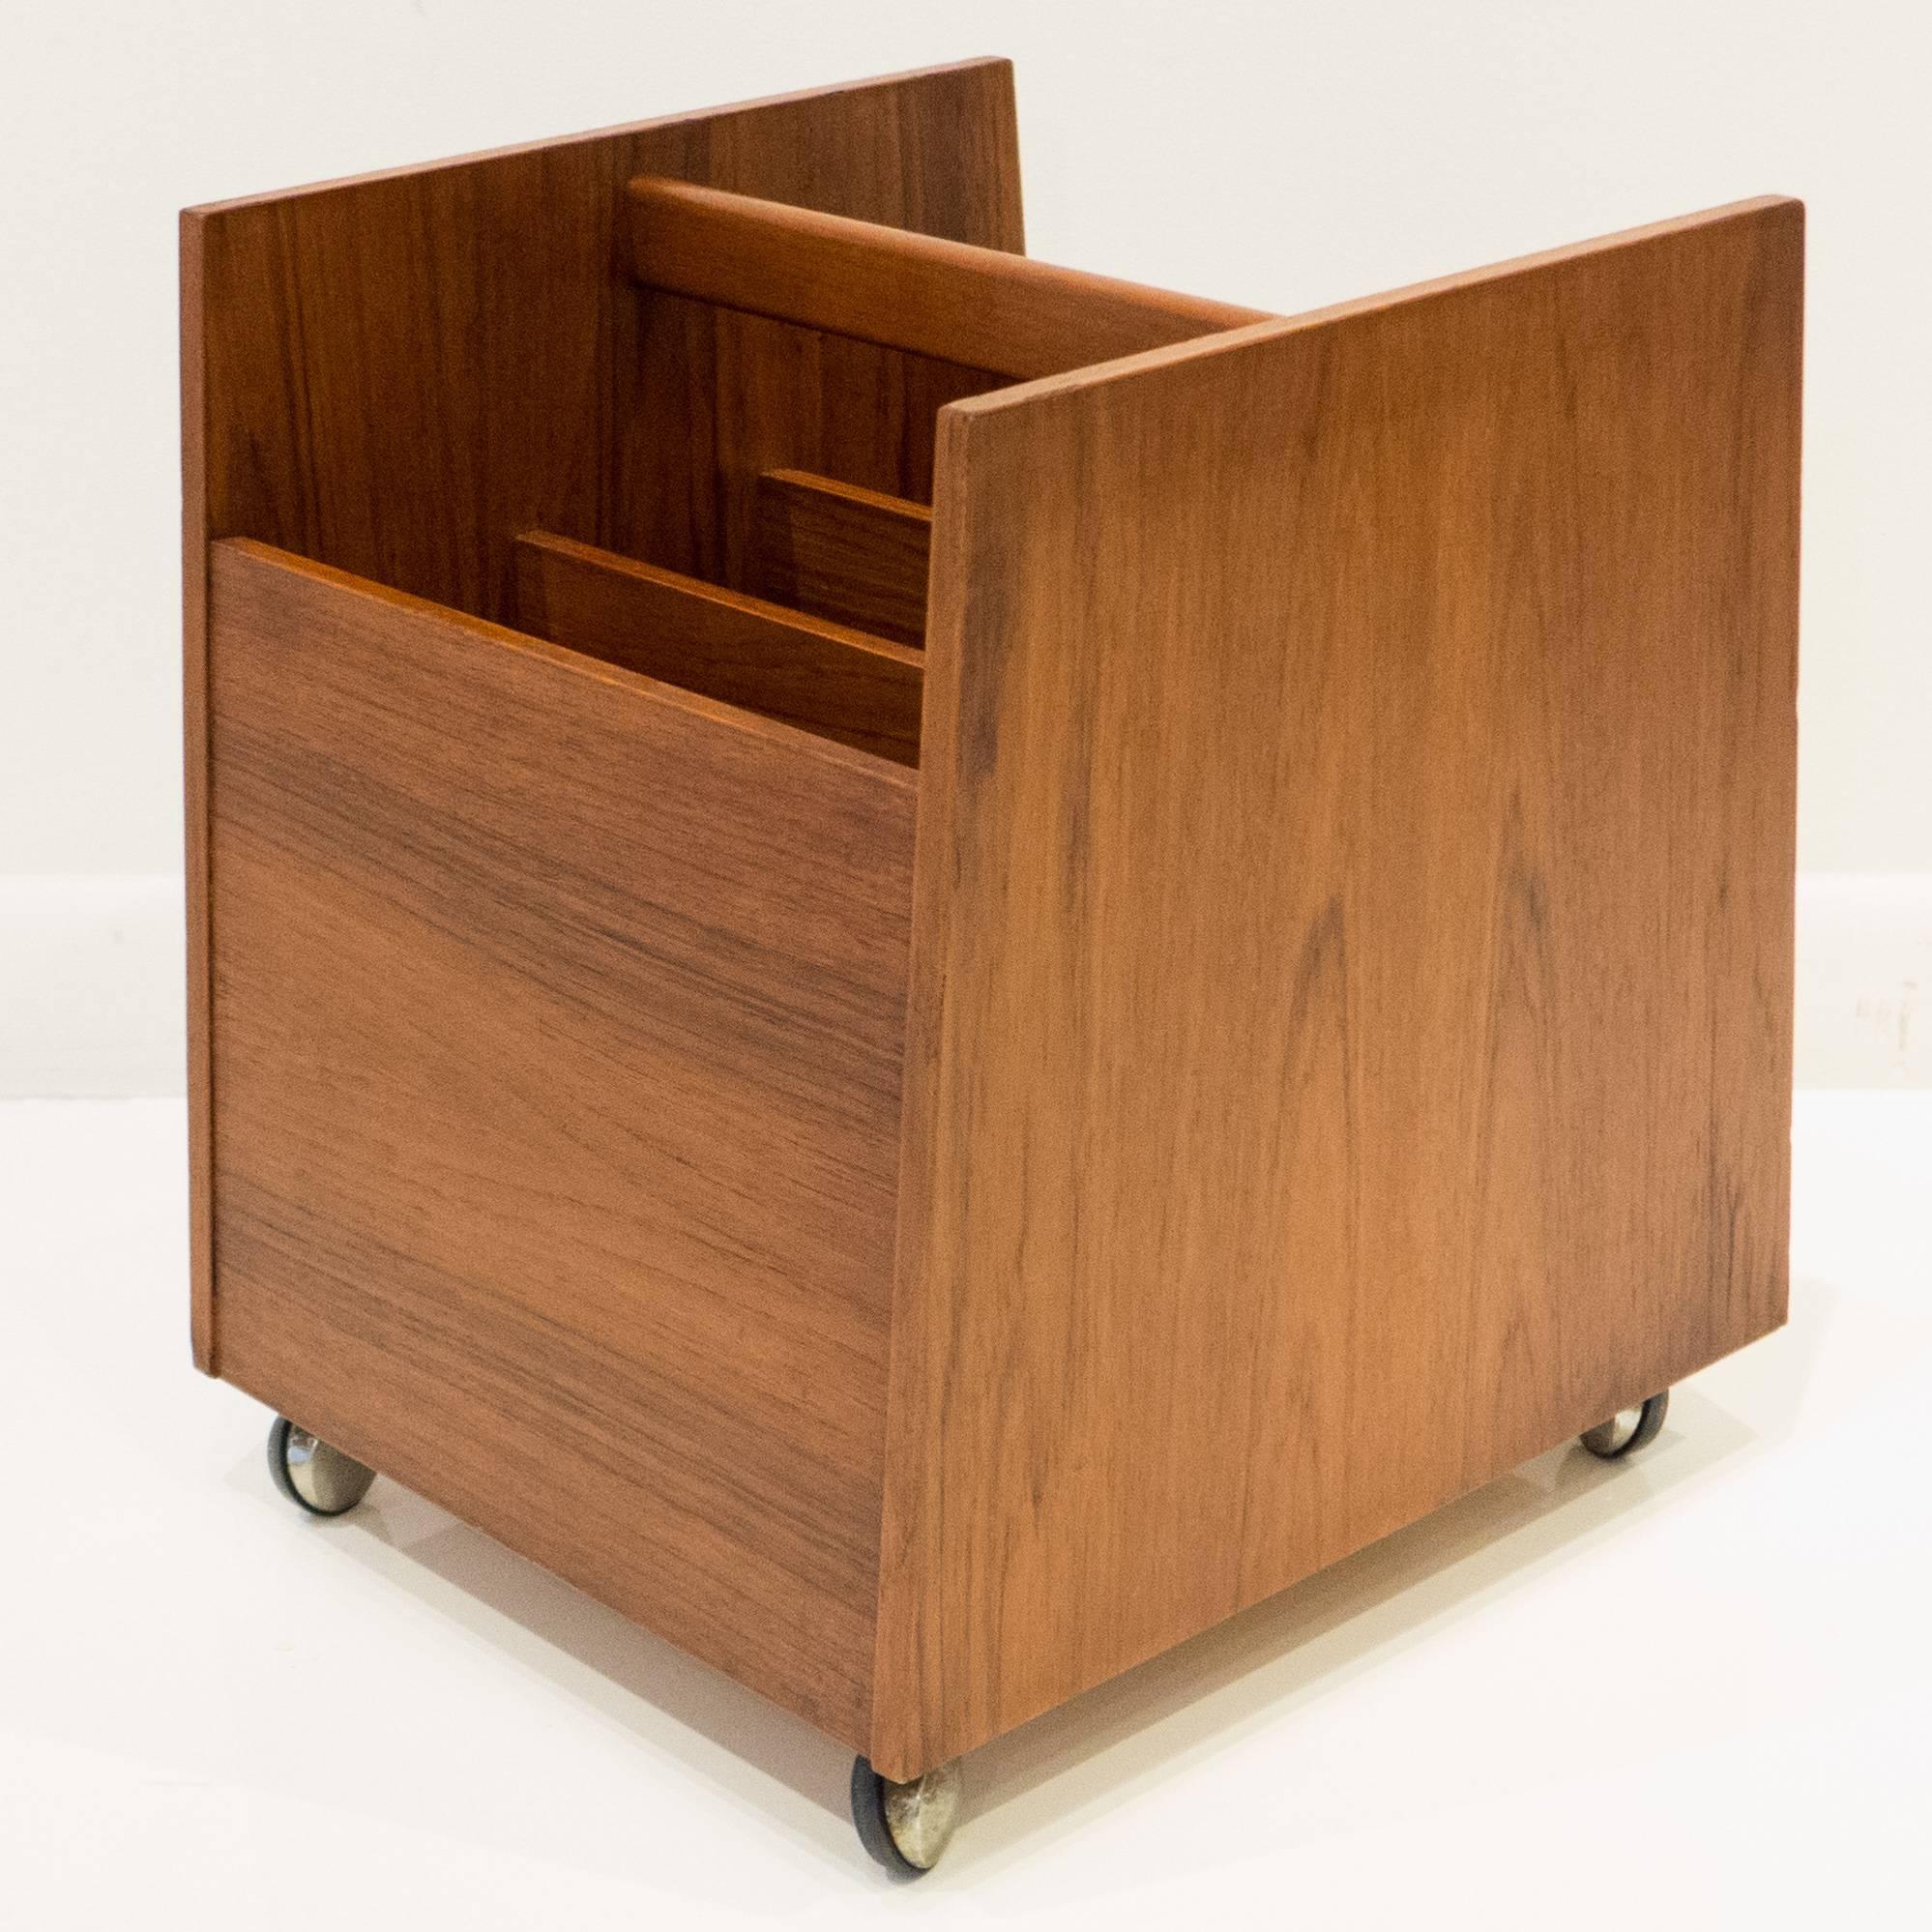 Teak-veneered magazine or record bin with vertical dividers, on casters. Designed by Rolf Hesland for Bruksbo, Norway, circa 1960s. Retains original label. The dividers slide out for larger loads.